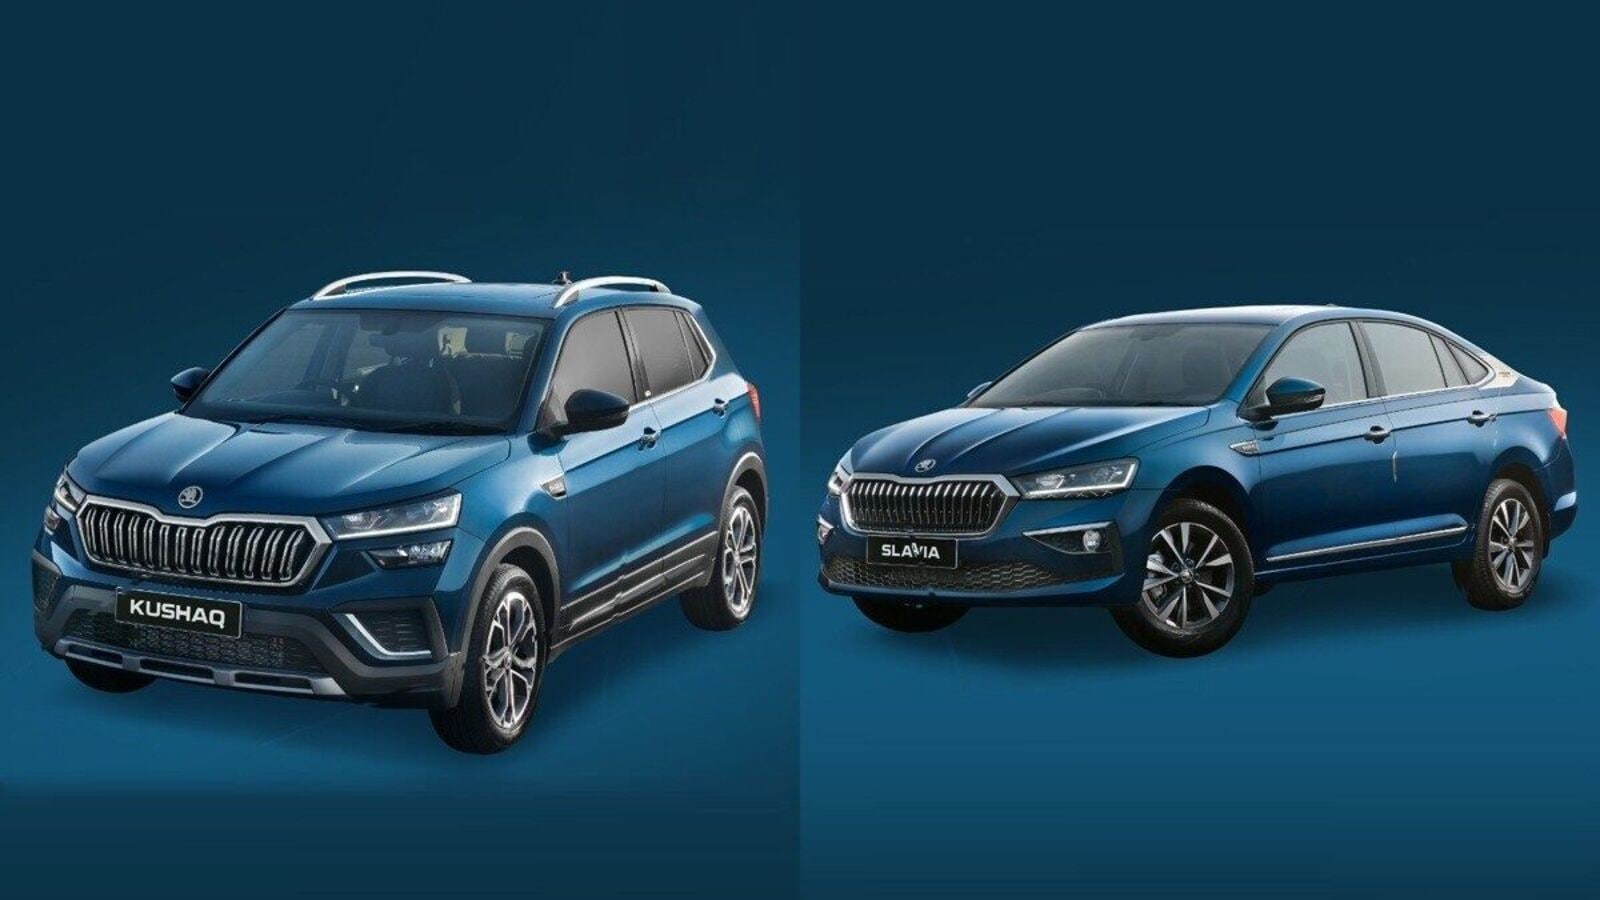 Skoda Kodiaq facelift receives cosmetic updates, added features